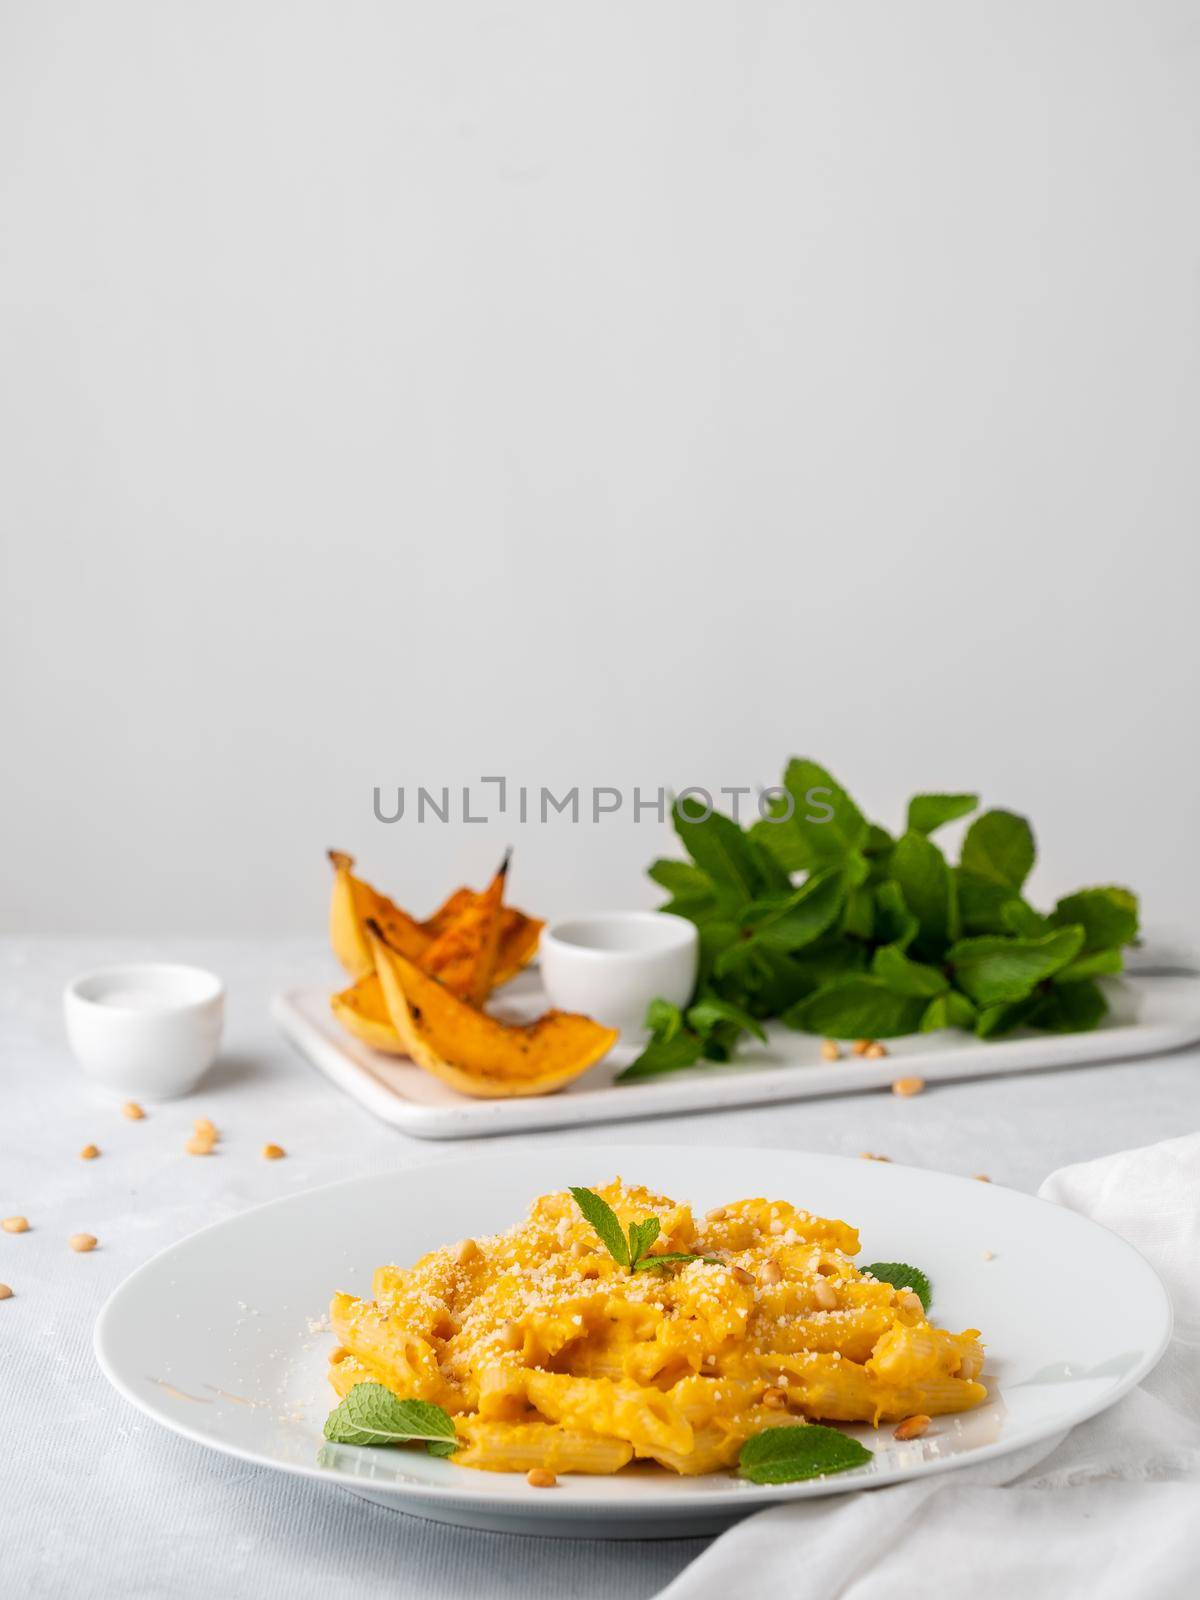 Pumpkin pasta penne with thick creamy sauce of baked squash and parmesan, side view, vertical by NataBene